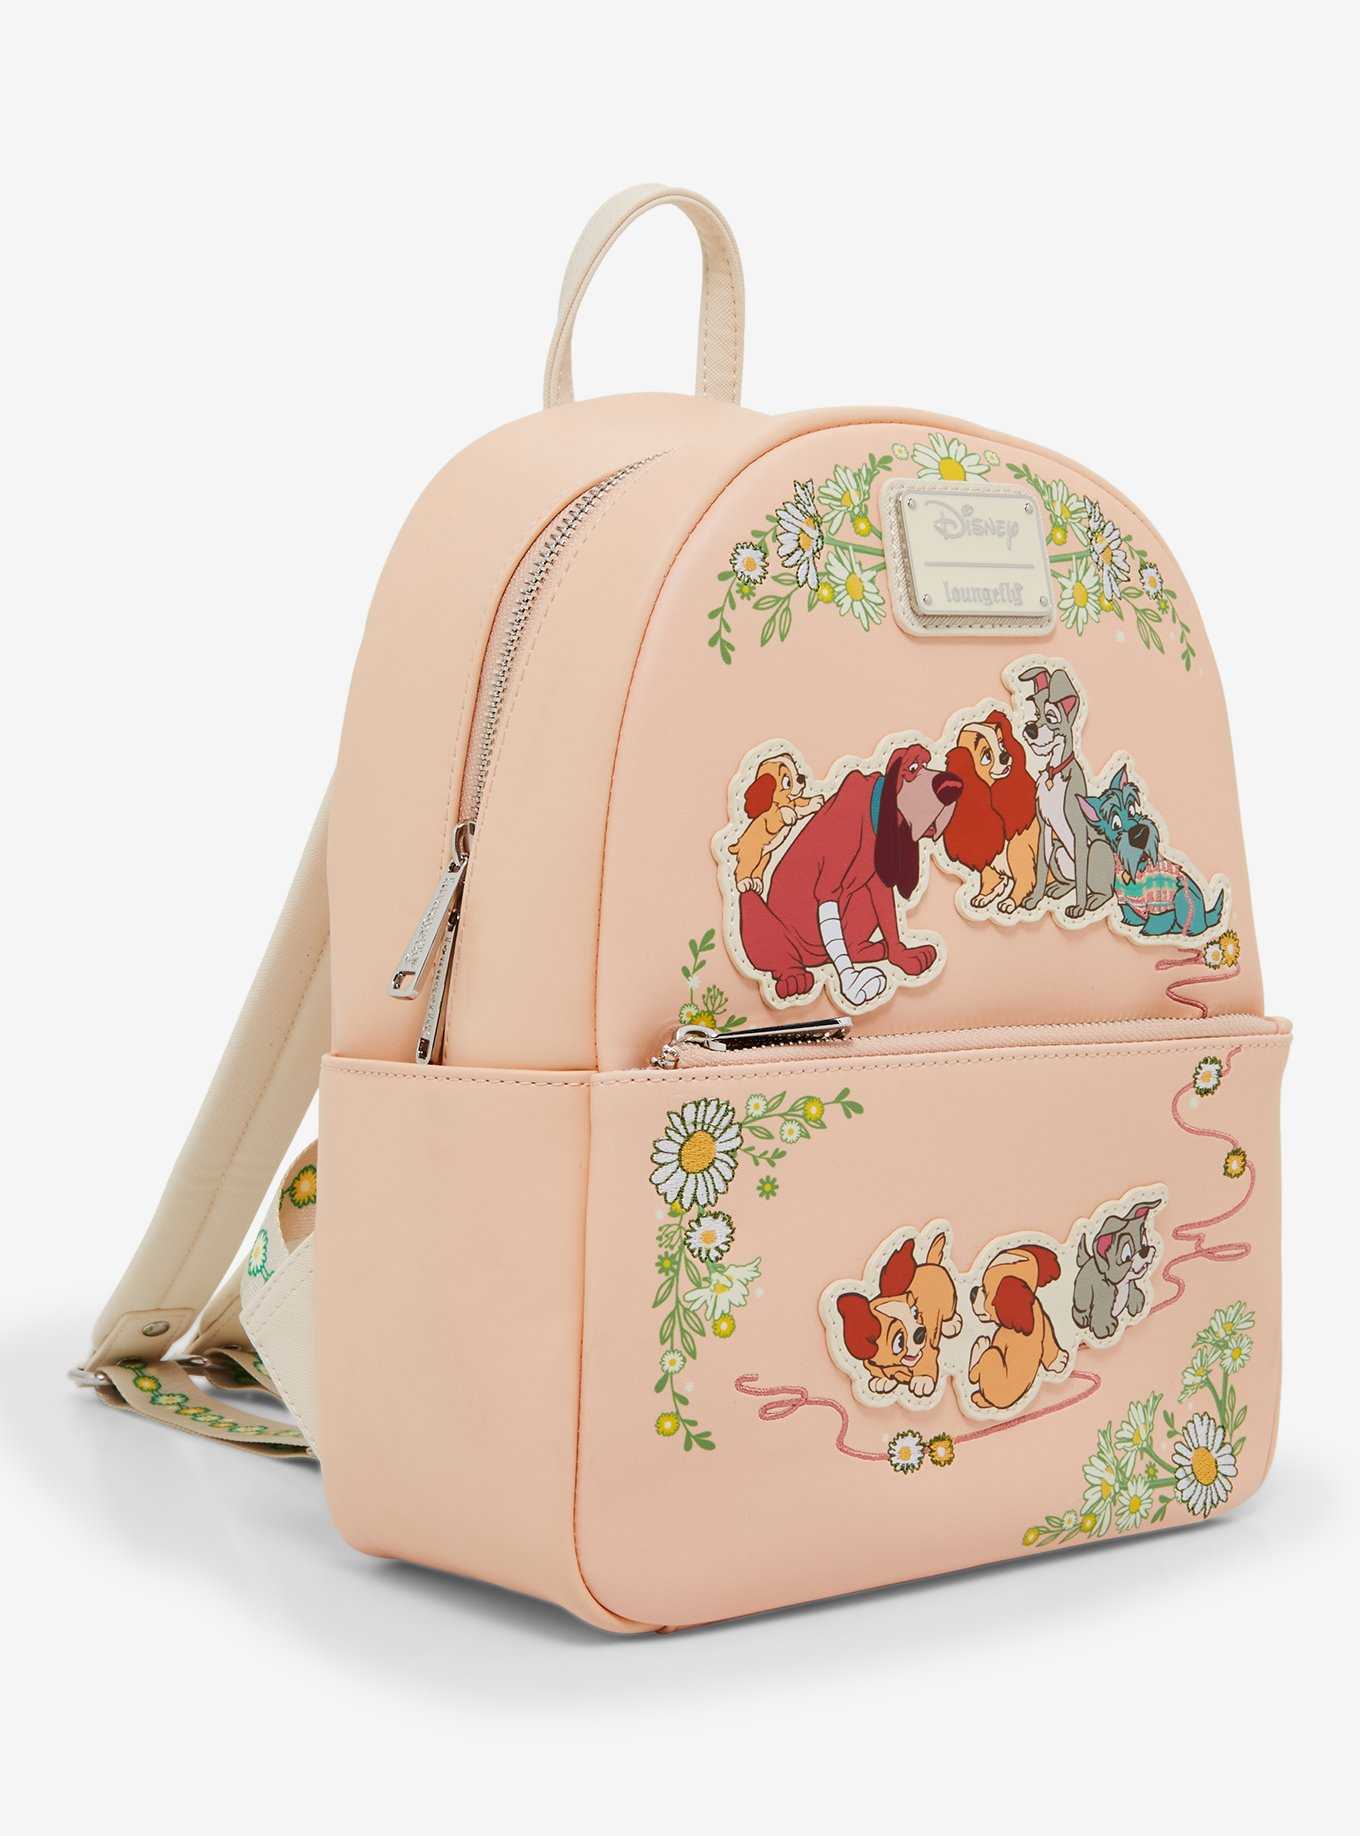 Loungefly Disney Lady and the Tramp Daisy Portrait Mini Backpack - BoxLunch Exclusive, , hi-res